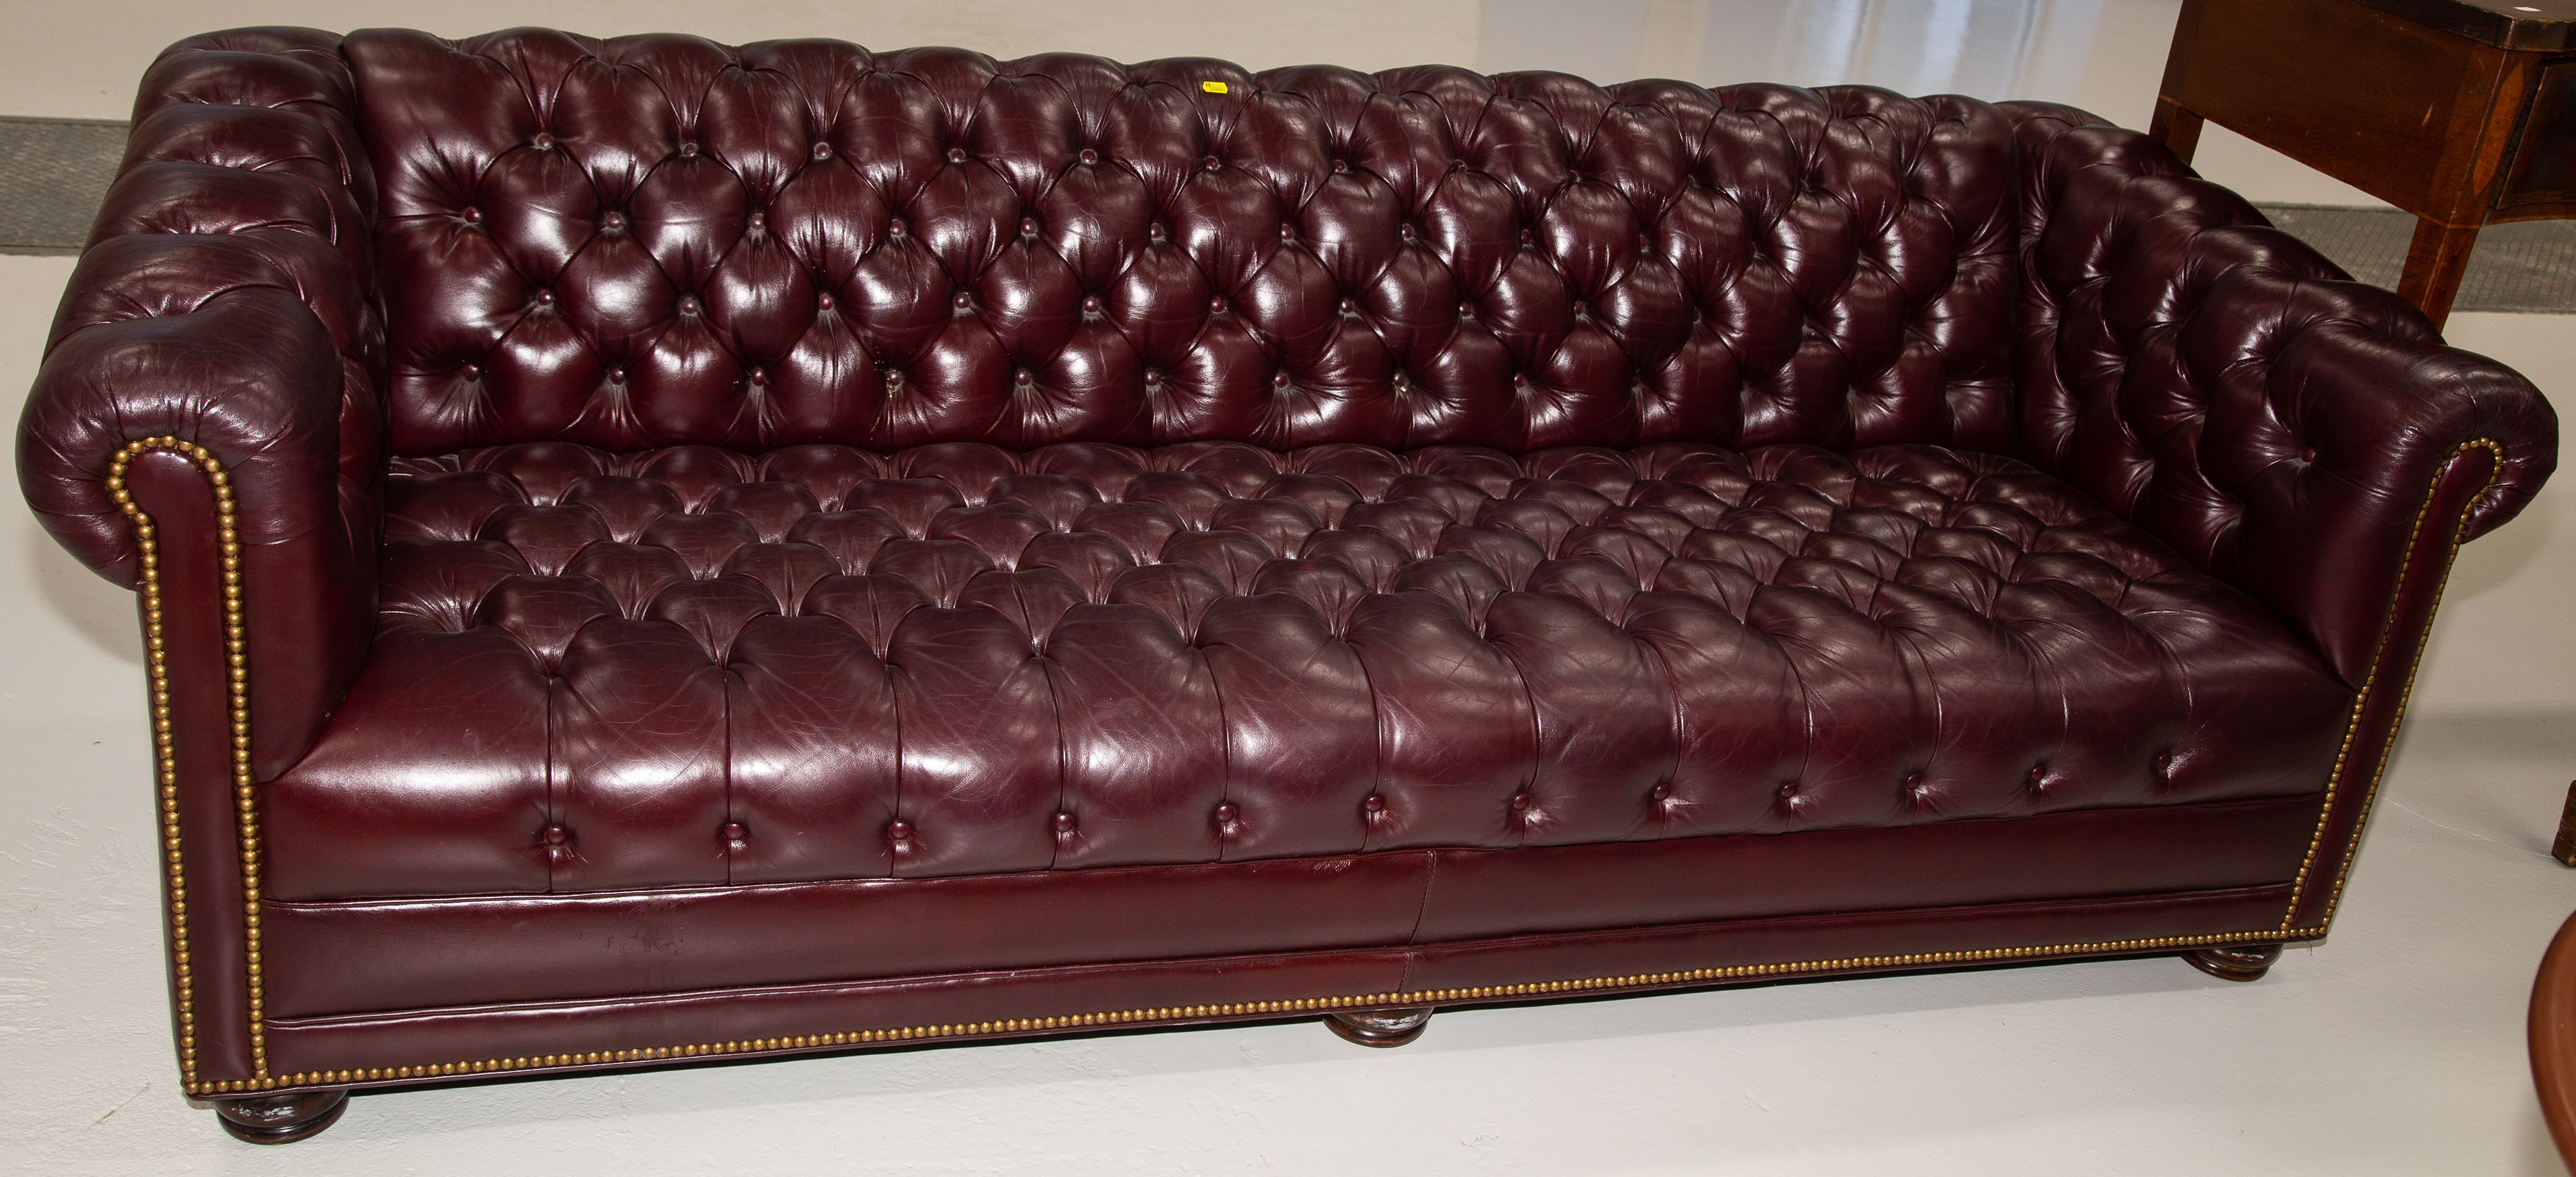 A TUFTED LEATHER SOFA Possibly leather.